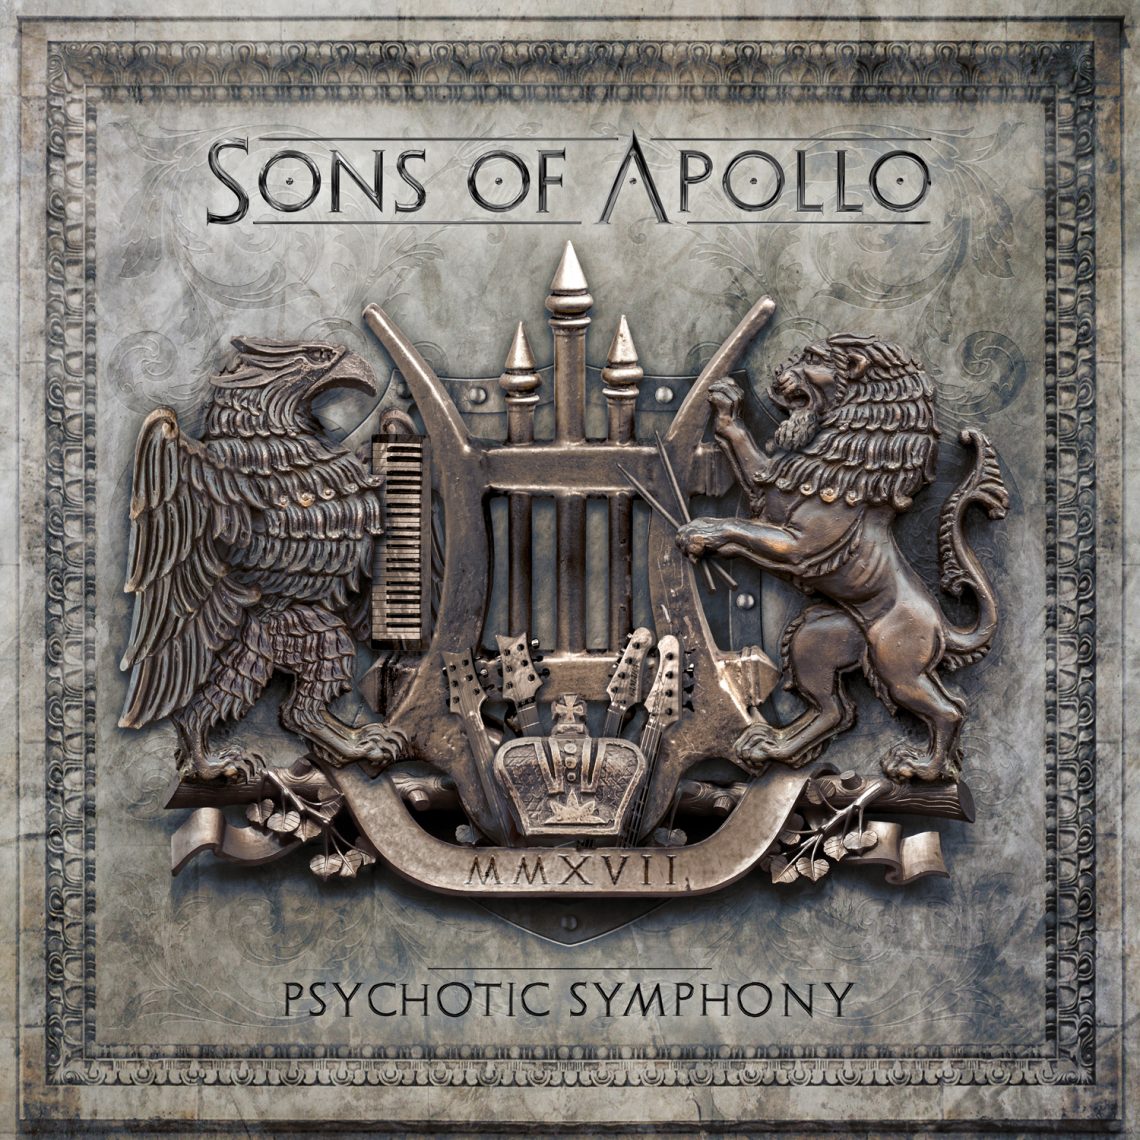 Sons of Apollo’s Psychotic Symphony: An Exercise in Banality